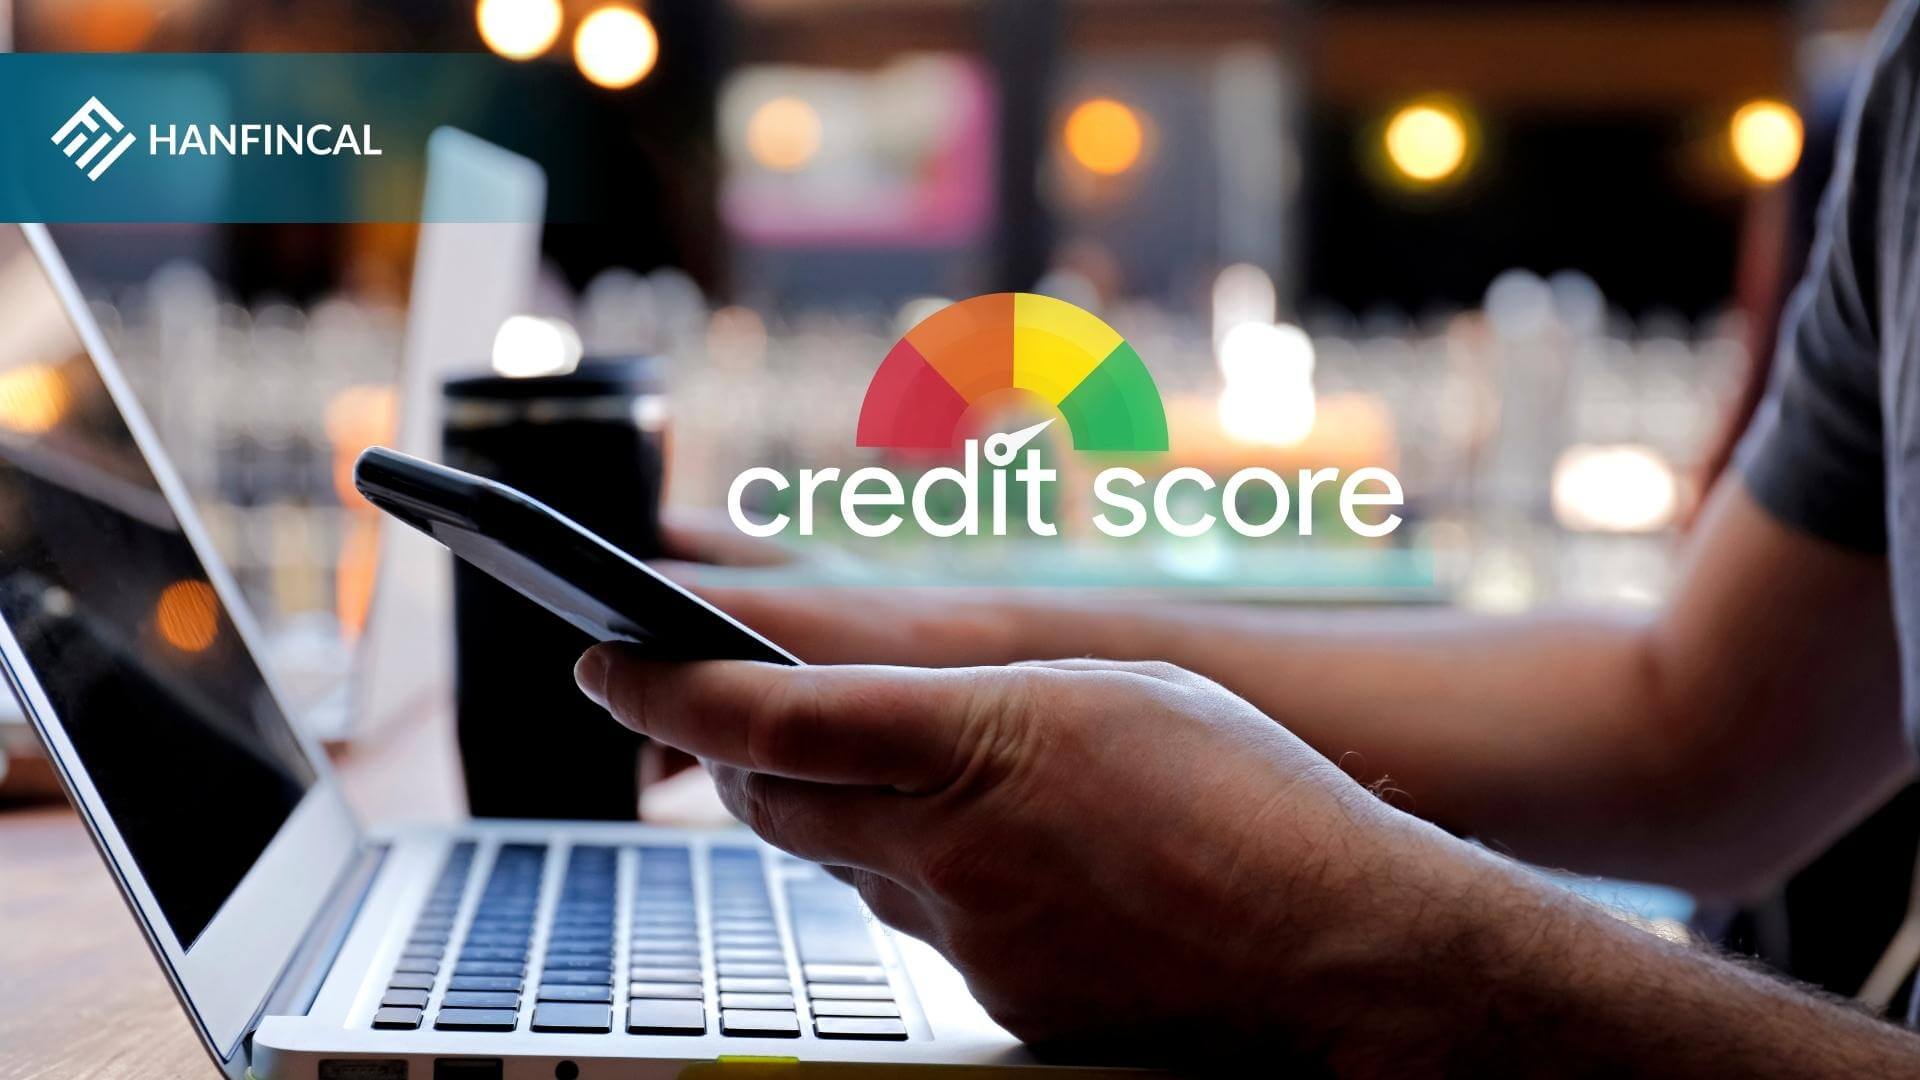 What changes your credit score?